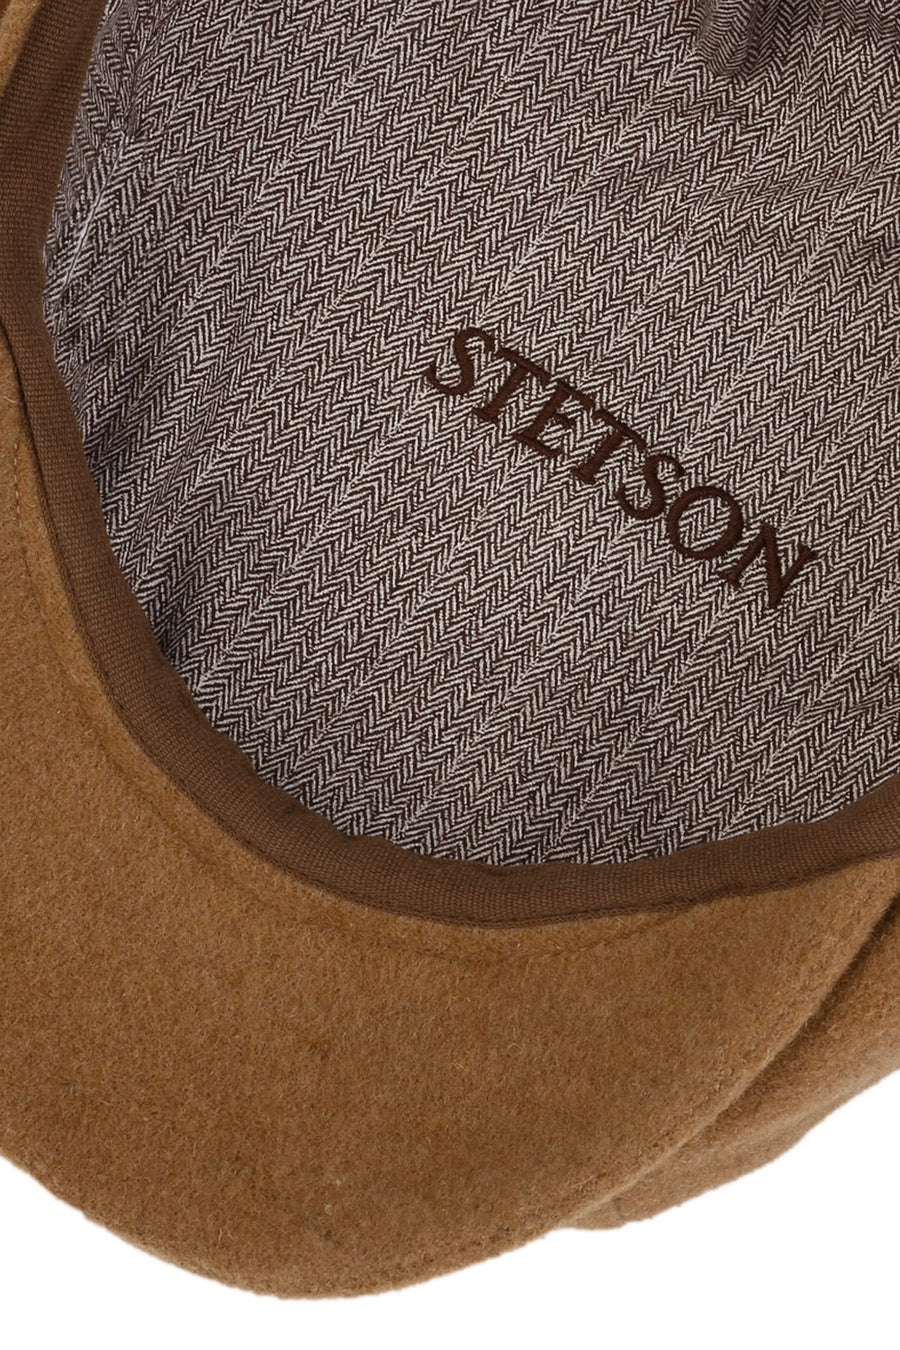 Buy the Stetson Hatteras Noir Hat in Camel at Intro. Spend £50 for free UK delivery. Official stockists. We ship worldwide.